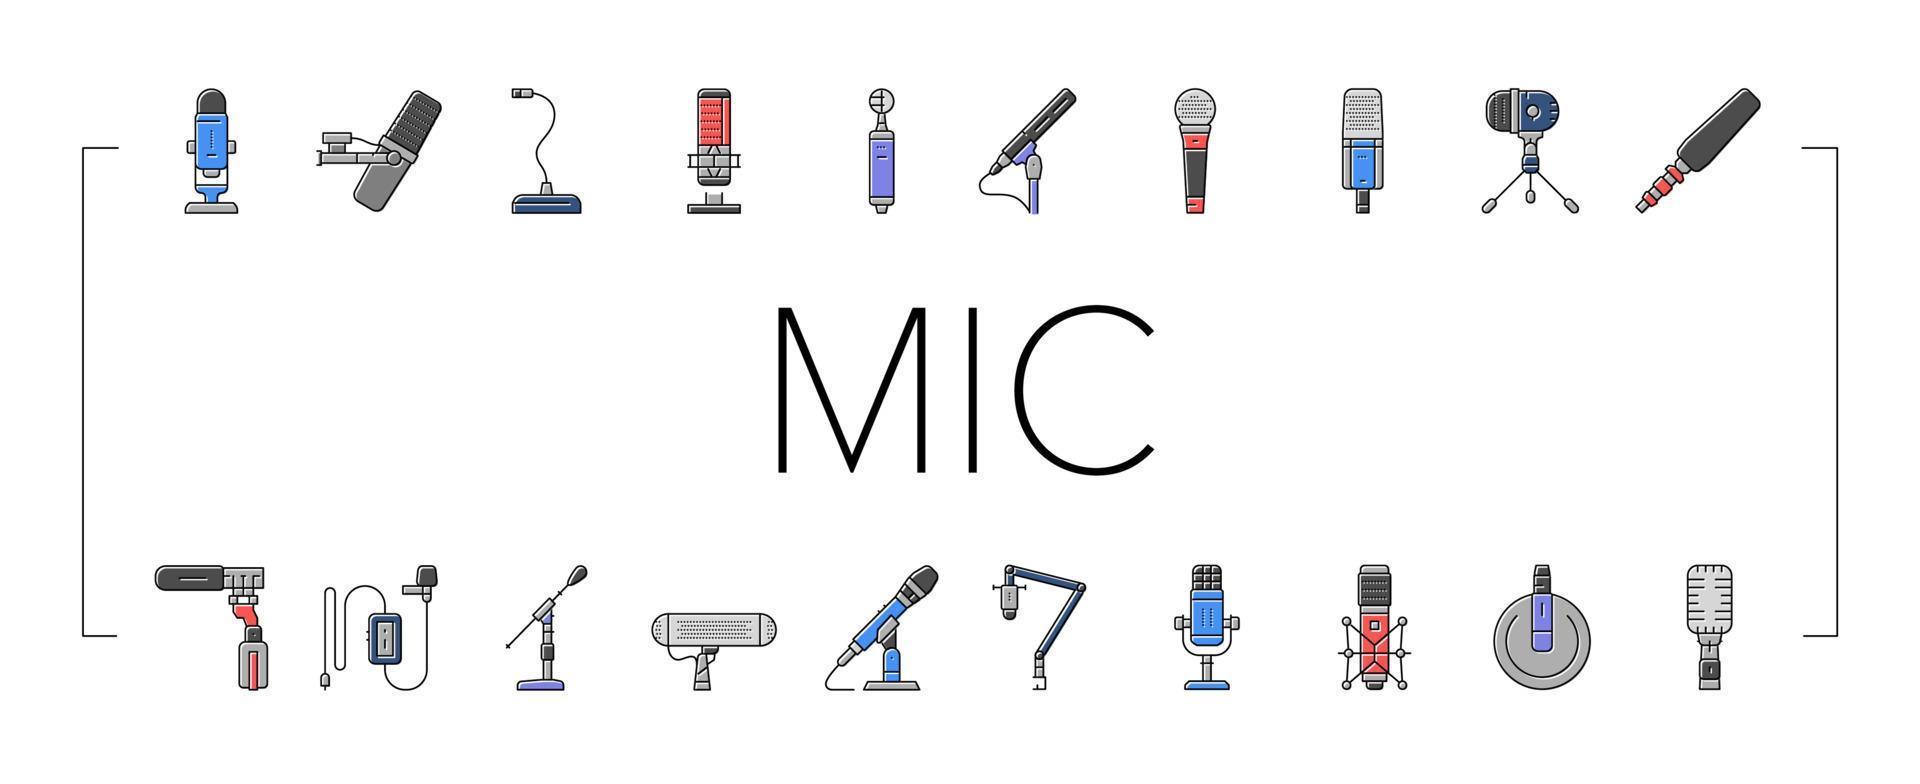 mic microphone voice podcast icons set vector